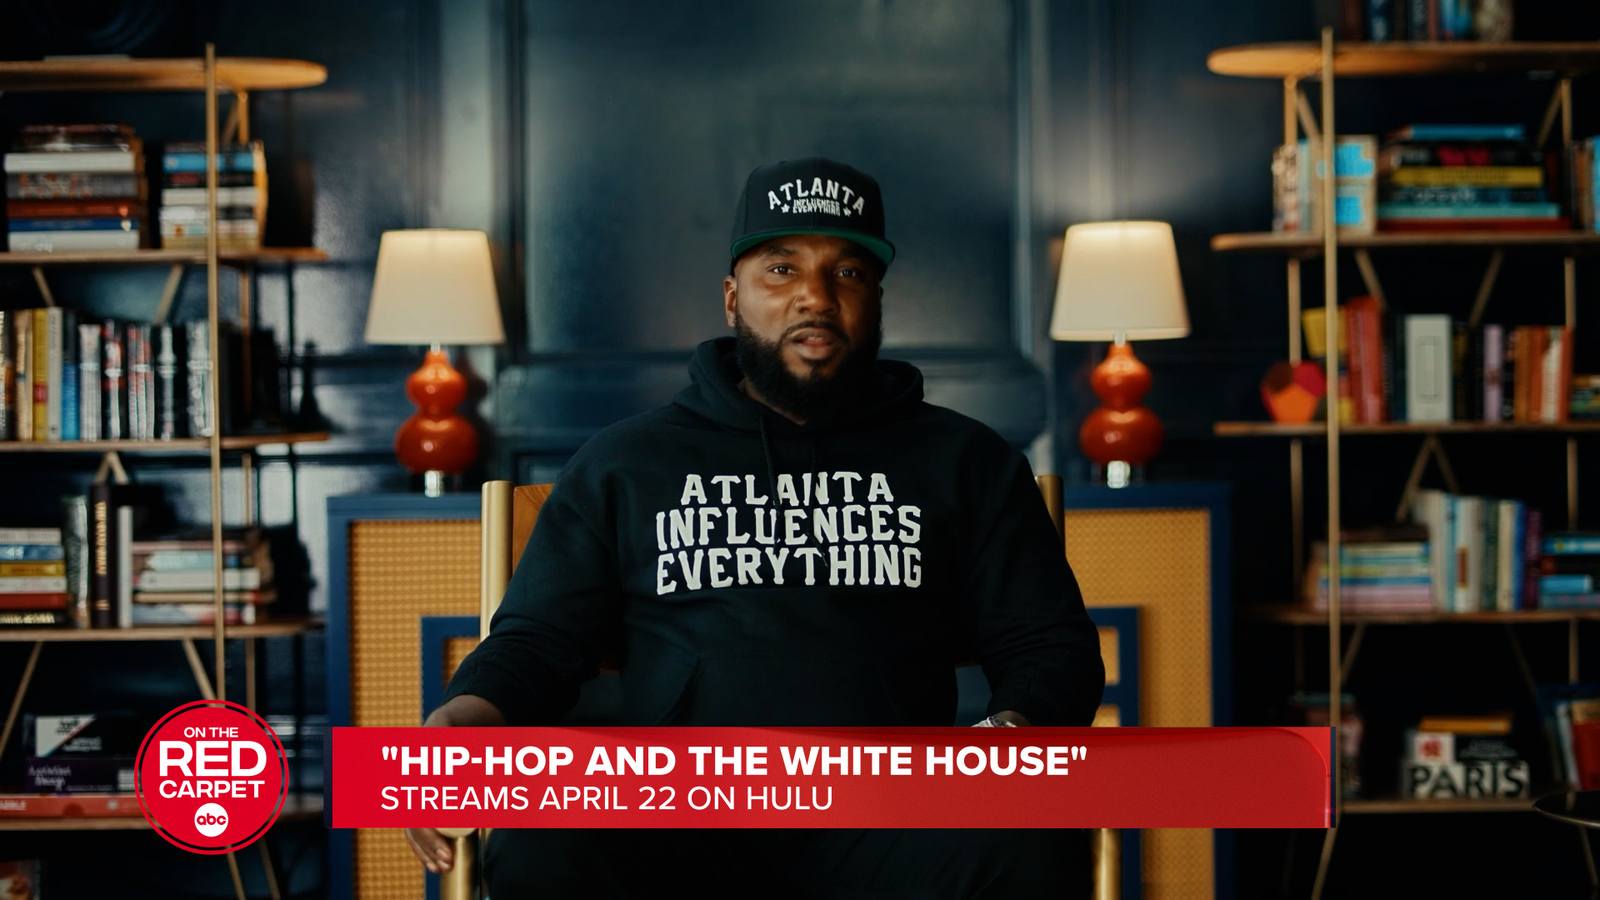 Jeezy, Common and more talk hip-hop and politics in new Hulu documentary [Video]